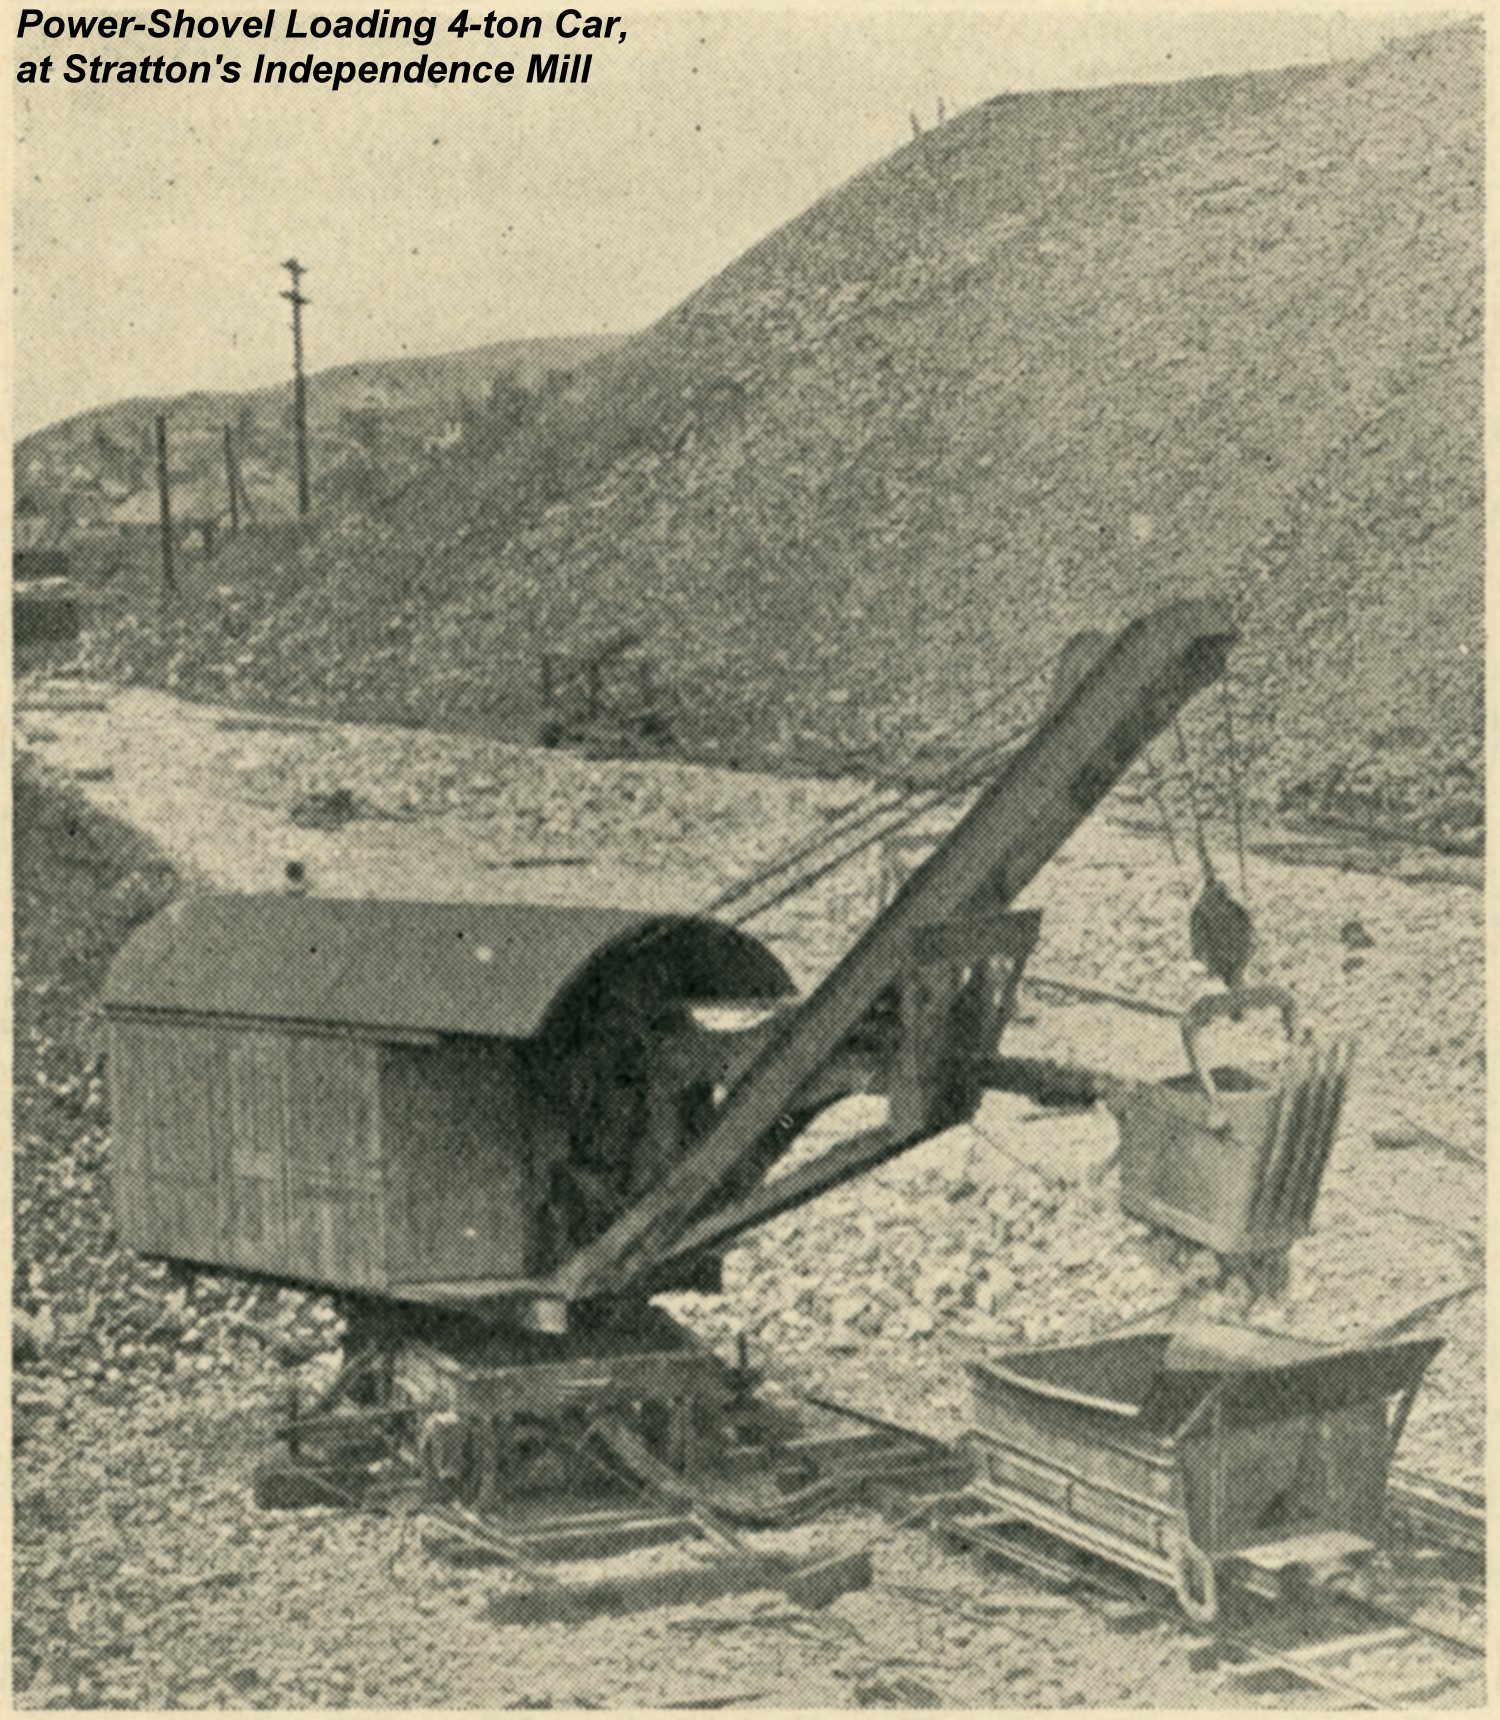 Quality on this printed image is so and so, but it is rare view of operations at the mill of the Stratton's Independence, making it a welcome addition to my collection.
   This Power-Shovel is working the dump, which is situated on a hillside traversed by deep depressions, giving an irregular and uncertain bottom; the ore is usually frozen near the bottom all the year round and in winter requires considerable blasting to prepare it for the shovel.
   The ore is loaded into 4-ton cars by a power-shovel with dipper of 1 cu. yd. capacity, the machine being operated by one 40 hp. variable speed electric motor, from which the digging, crowding, swinging, and advancing motion are all derived by clutch-gearing controlled by levers operated by one man. The ore-cars are hoisted up an incline plane and automatically dumped into a No. 7½ Gates breaker.